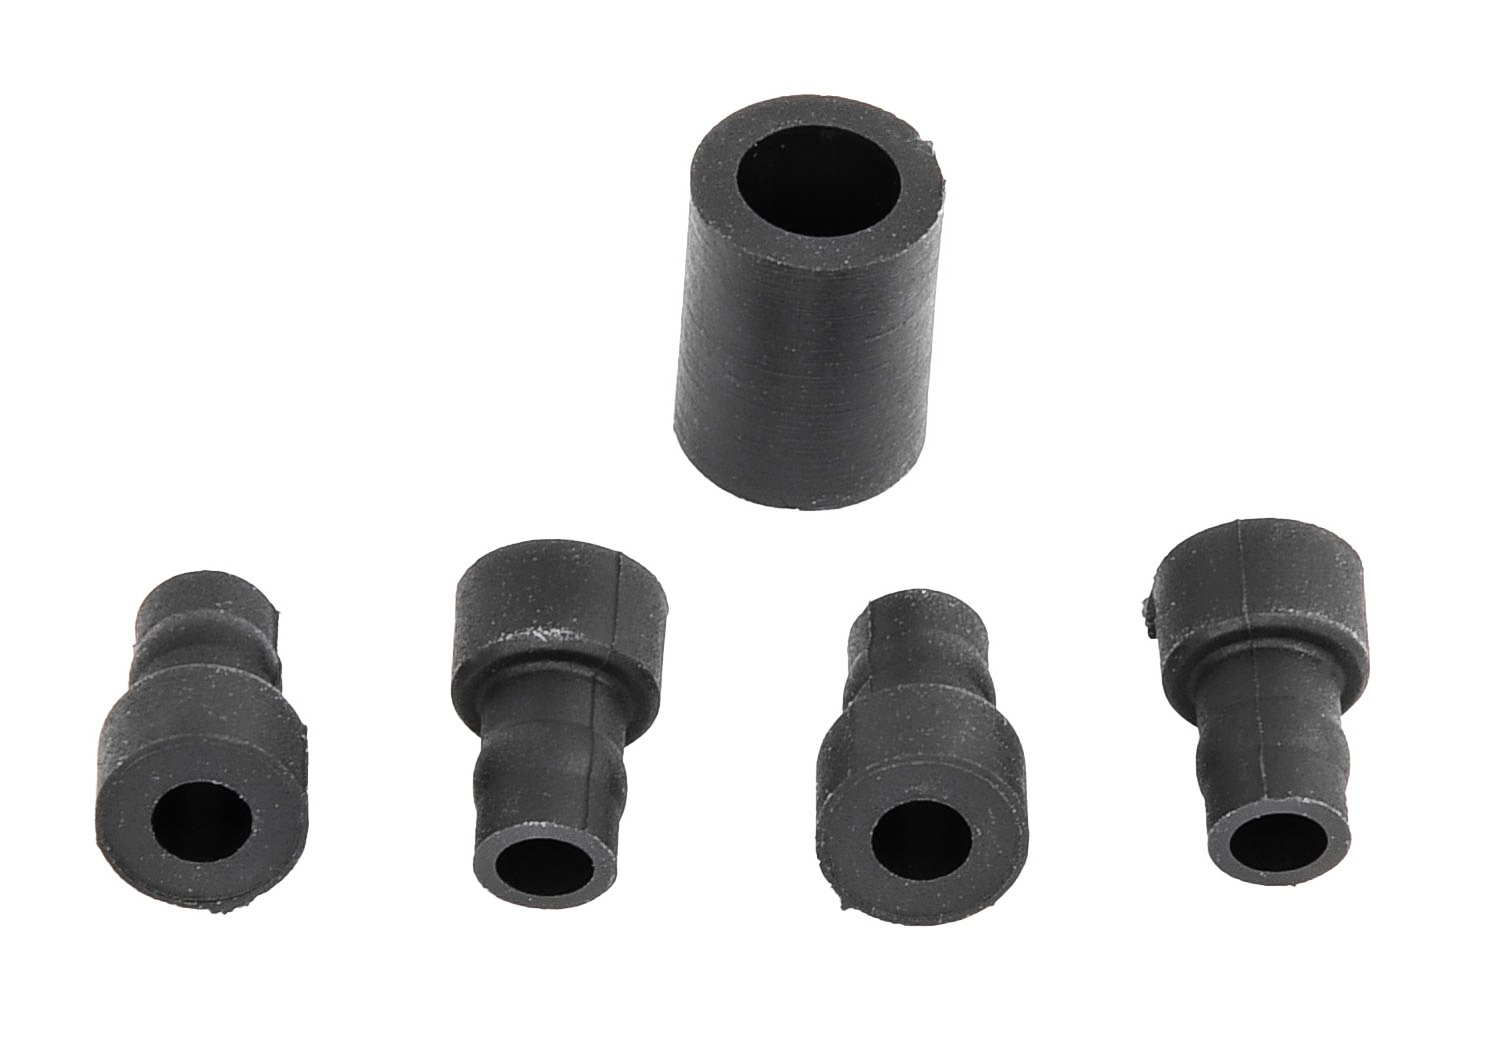 Spacer and Adapter Kit